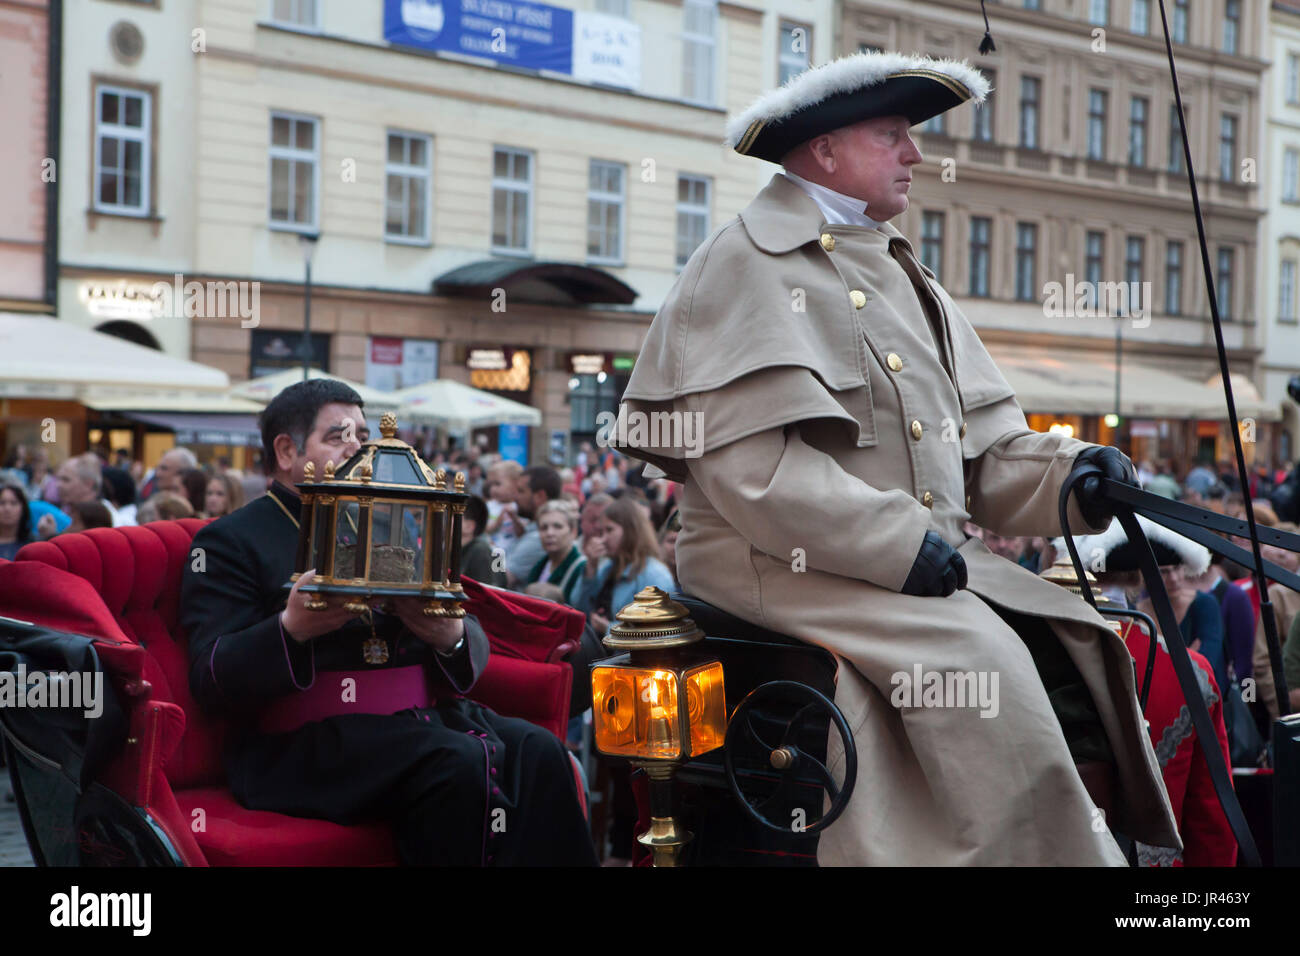 Ceremonial procession with the relics of Saint Paulina of Rome (Pavlína Římská), the patron saint of the city, seen during the city festival in Olomouc, Czech Republic. Stock Photo